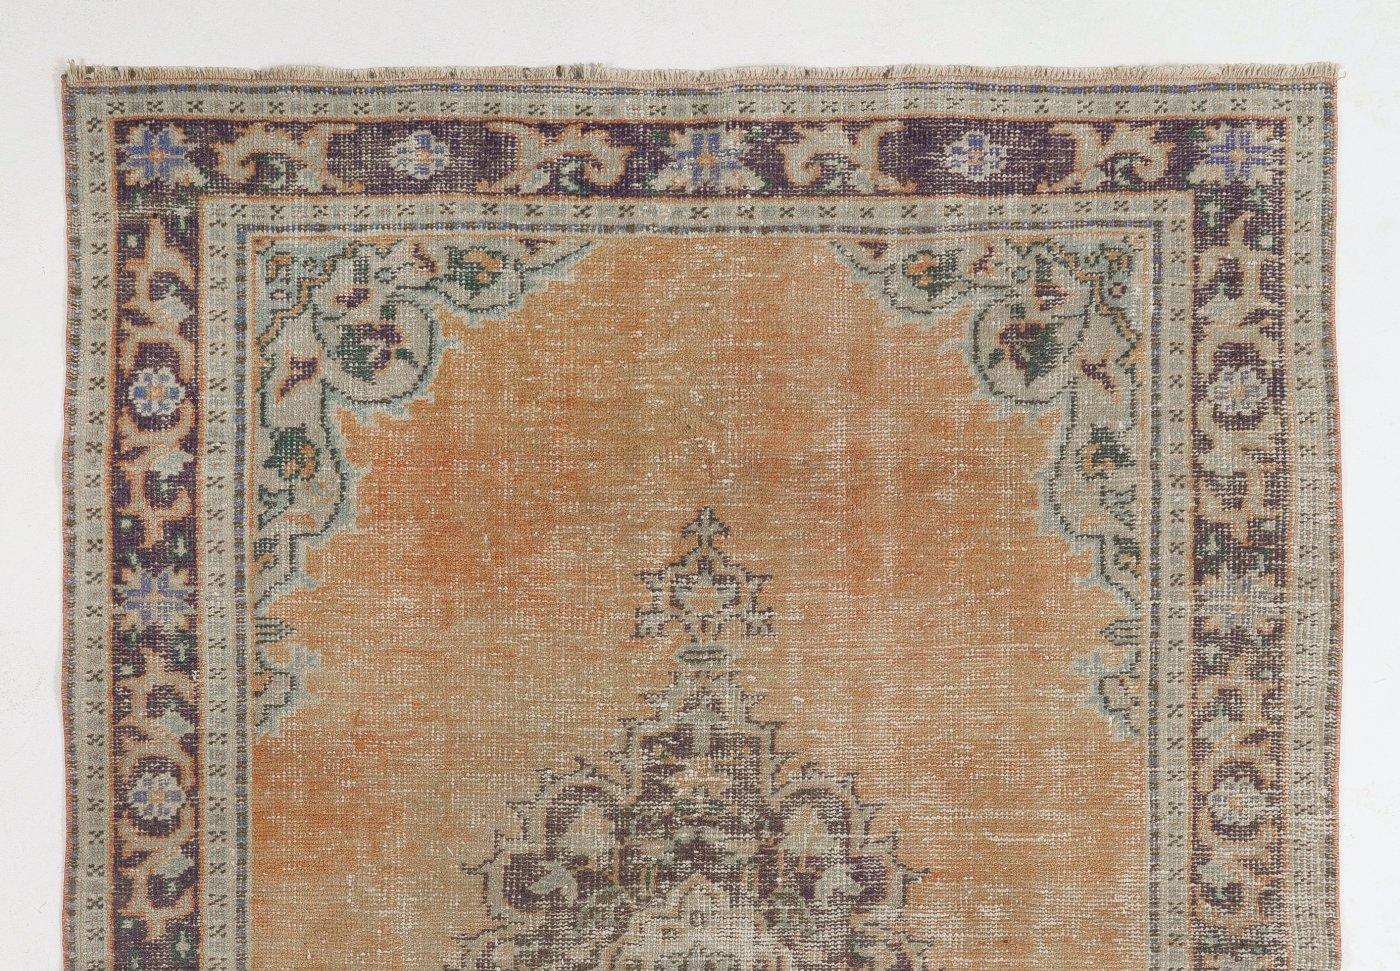 A vintage hand-knotted rug from Central Turkey with distressed low wool pile on cotton foundation, featuring a central medallion against a plain field in faded tomato red. The rug is in good condition, sturdy, as clean as a brand new rug (deep